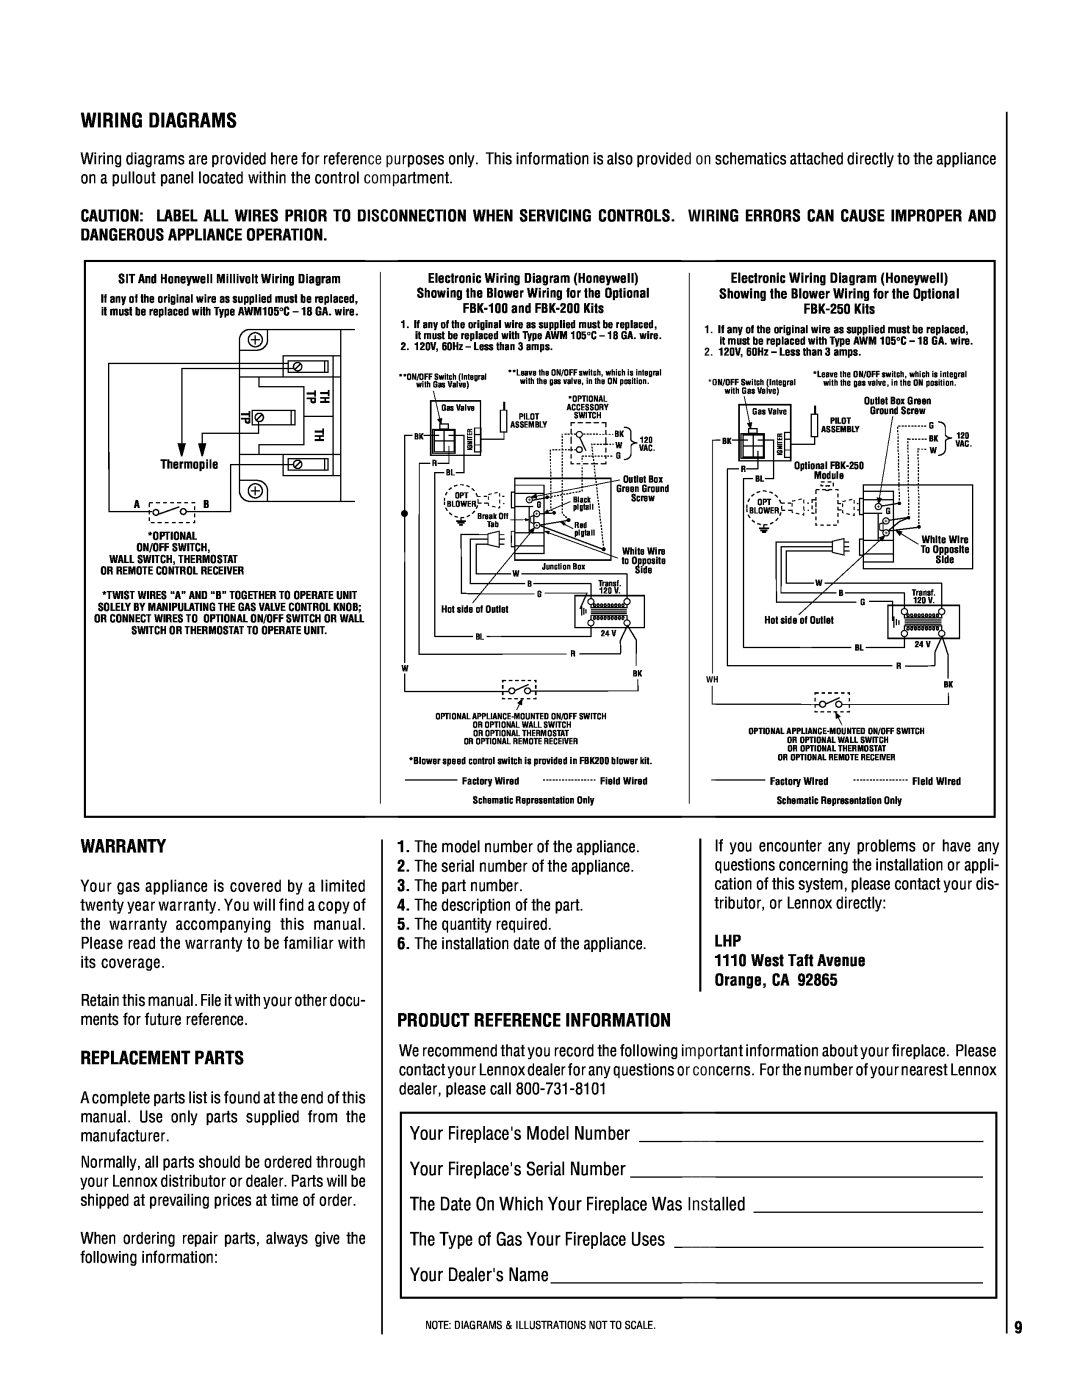 Superior DR500 manual Wiring Diagrams, Warranty, Replacement Parts, Product Reference Information, FBK-100and FBK-200Kits 